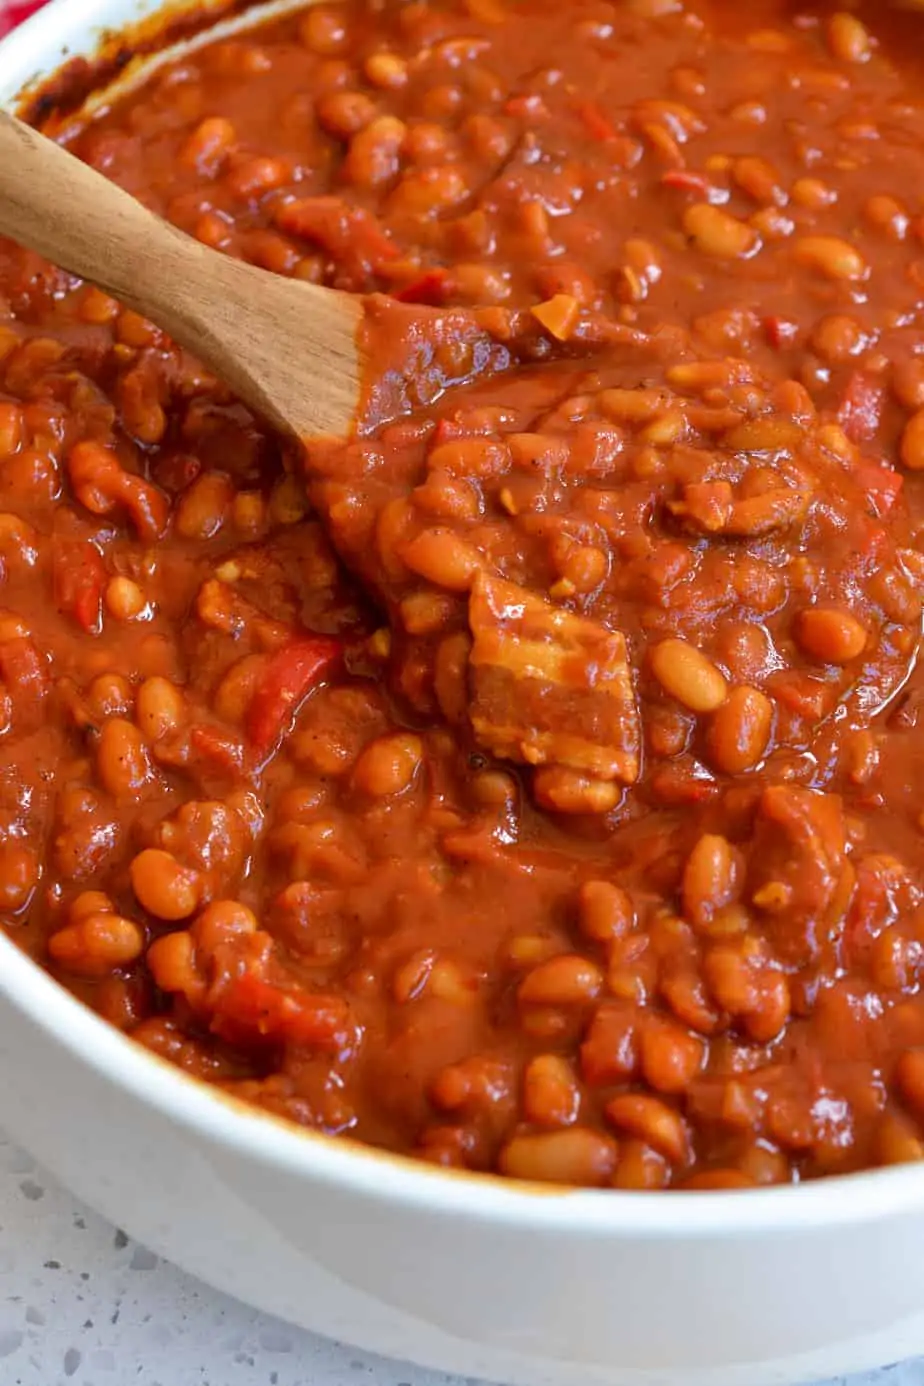 Company-worthy baked beans made with dried navy beans, smoked bacon, onions, garlic, and molasses in a sweet tangy sauce with just a touch of kick.  